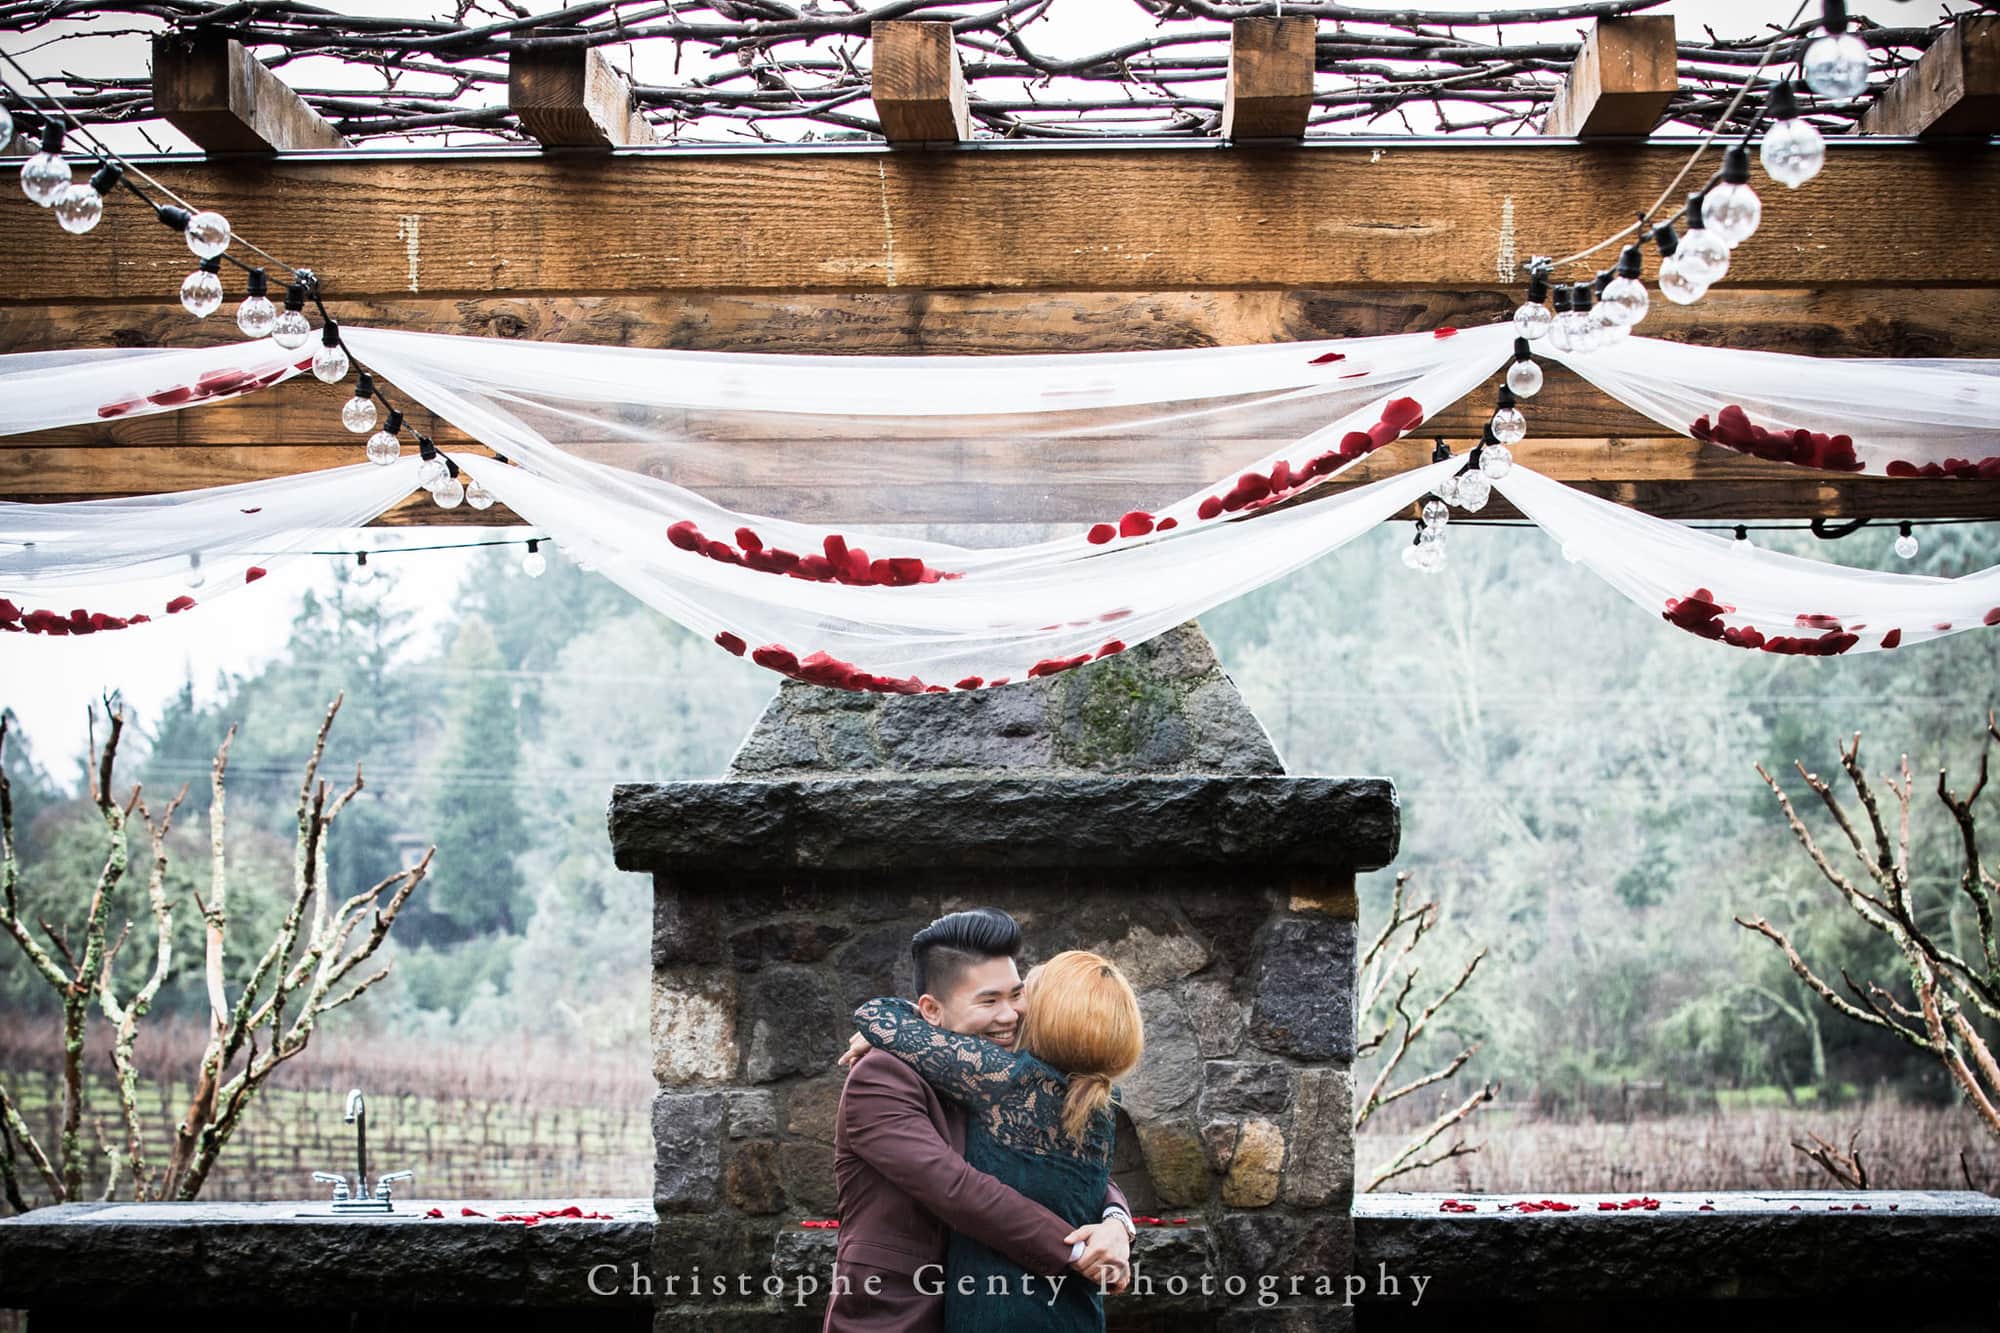 Marriage Proposal Photography in The Napa Valley - Bremer Winery